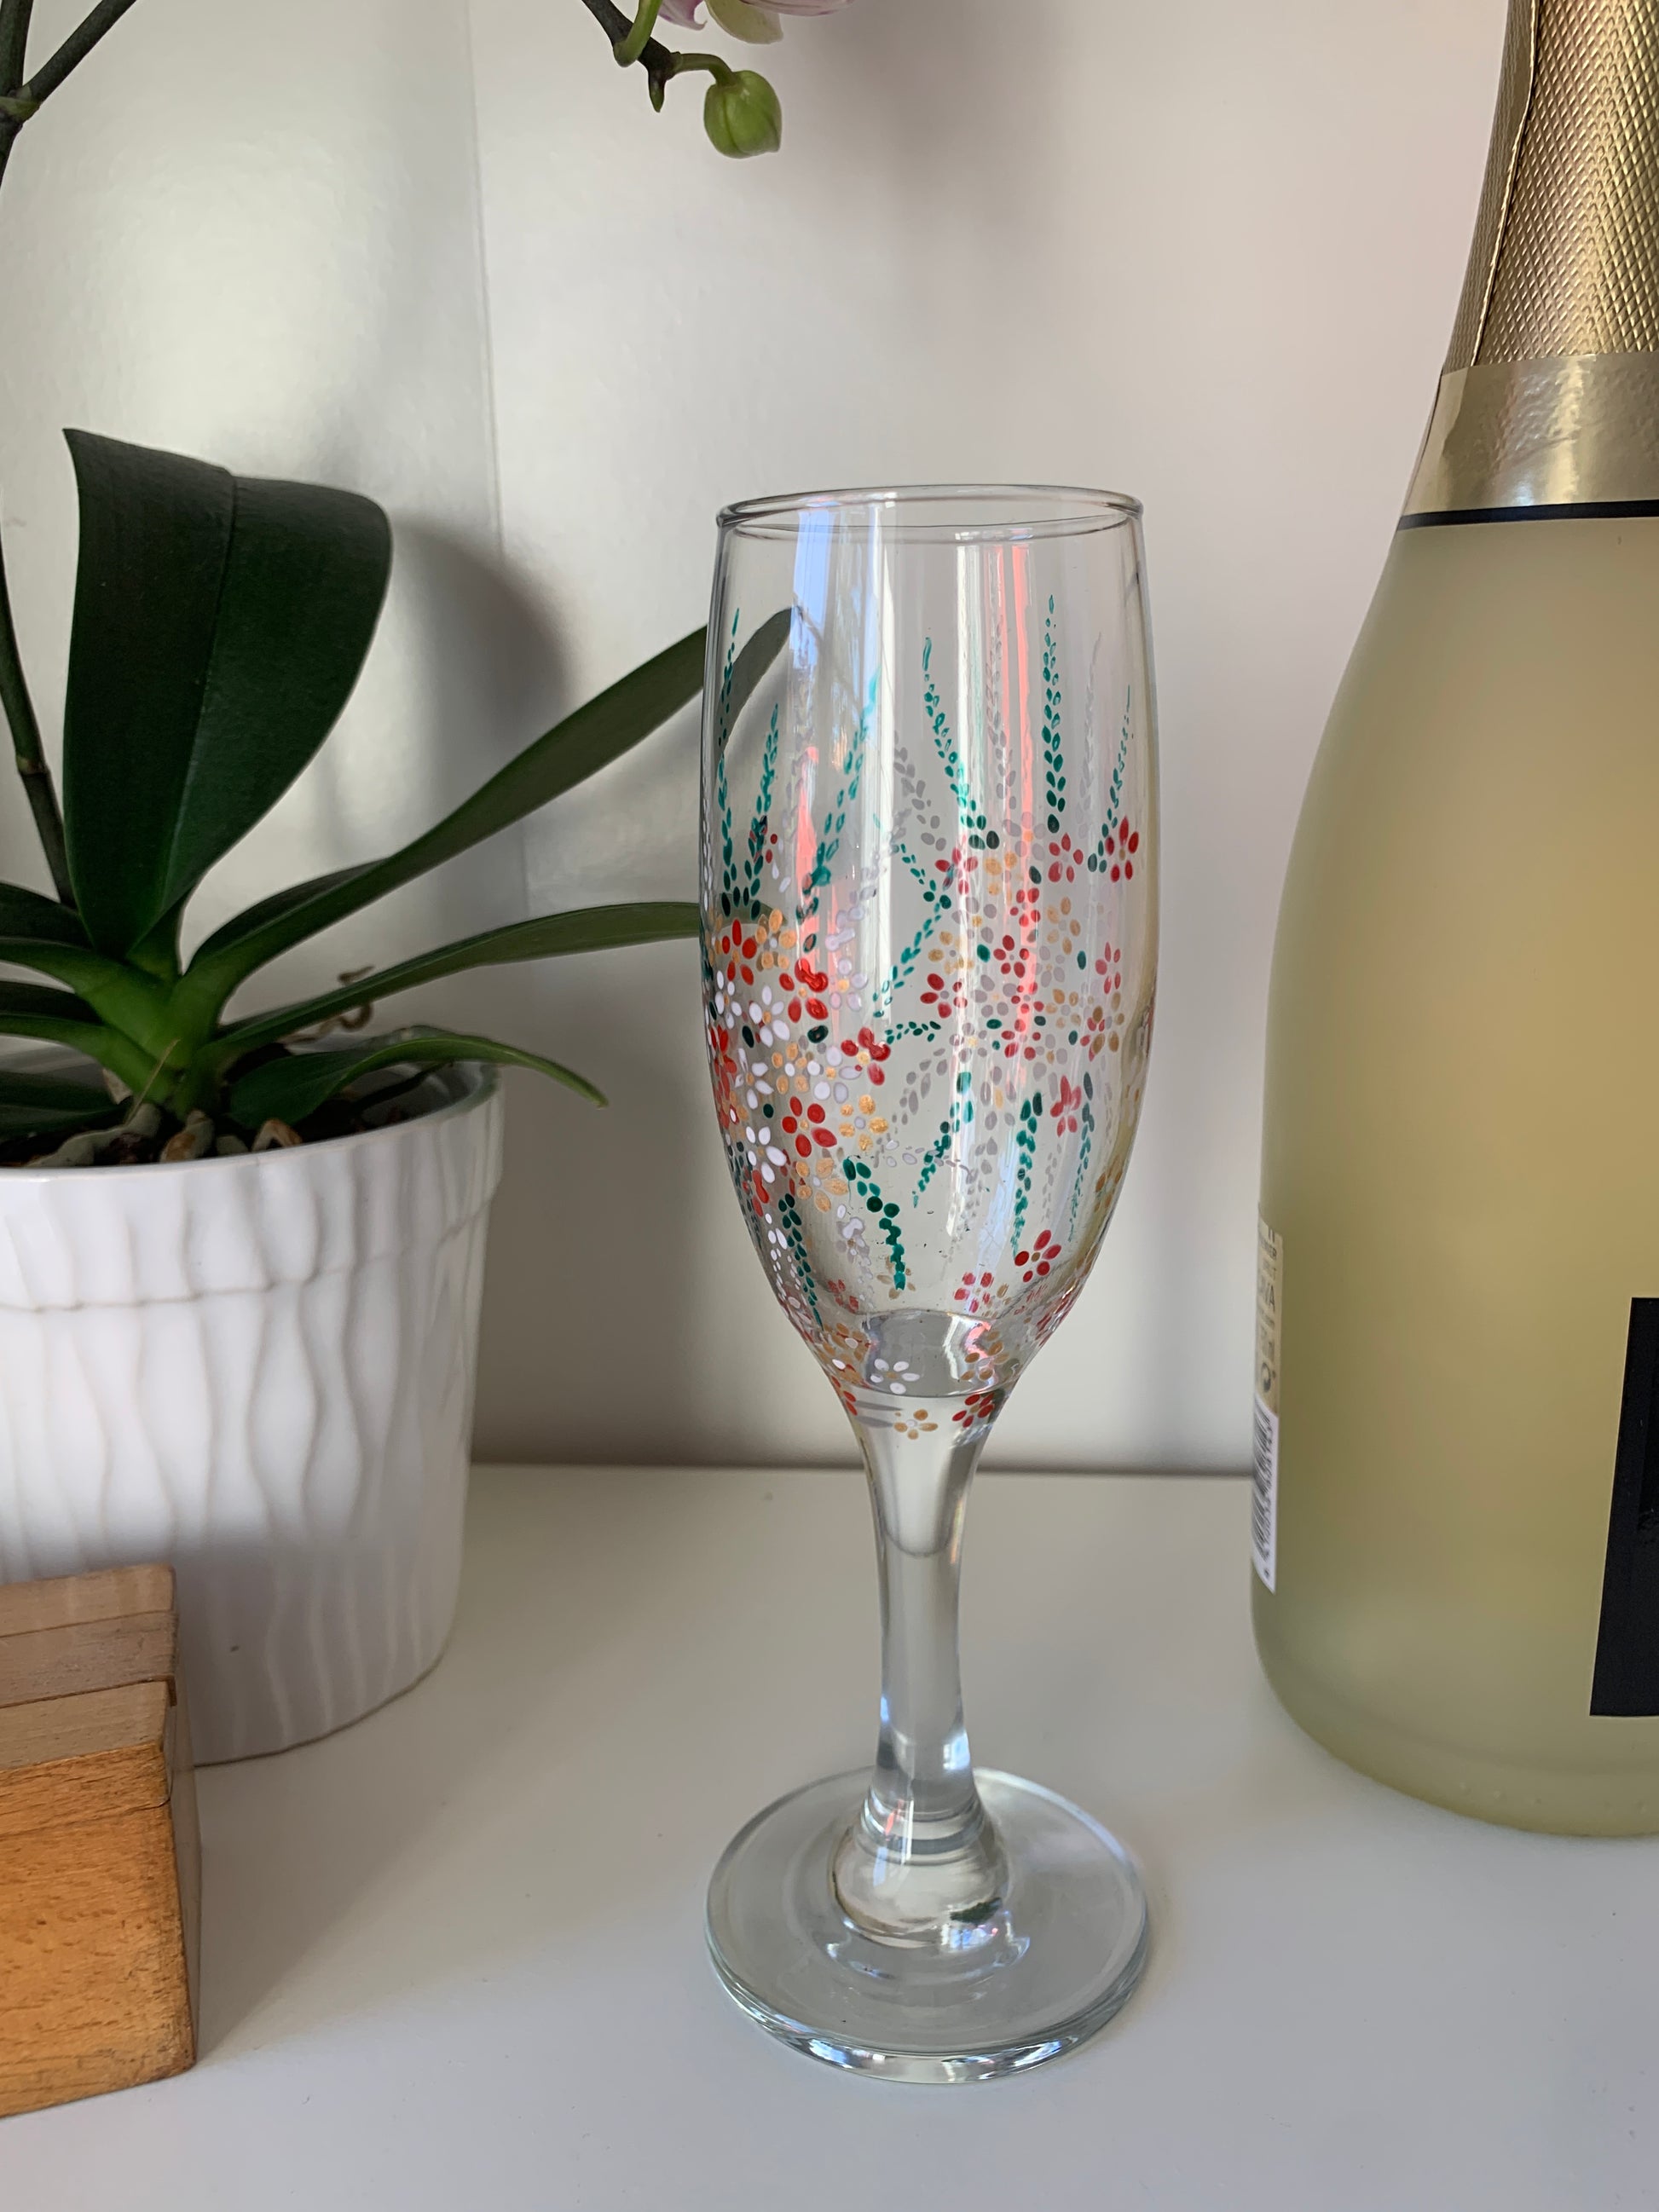 White Vintage Rose Hand Painted Champagne Flutes - 2 Flutes